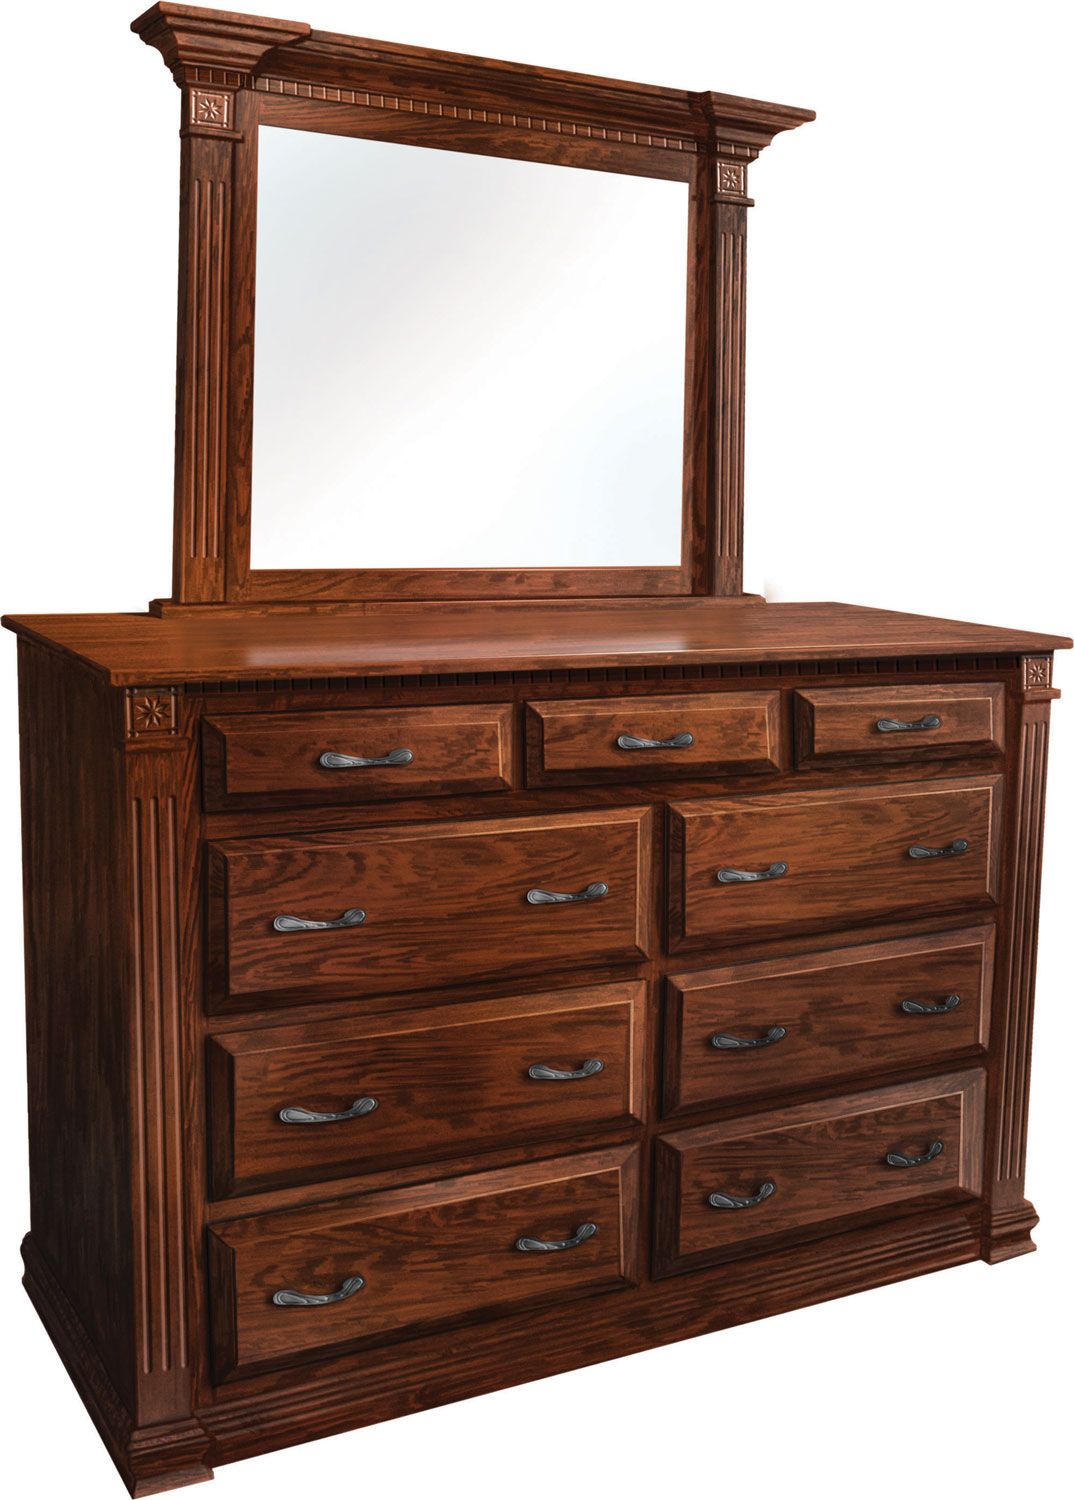 Traditional High Dresser with Mirror